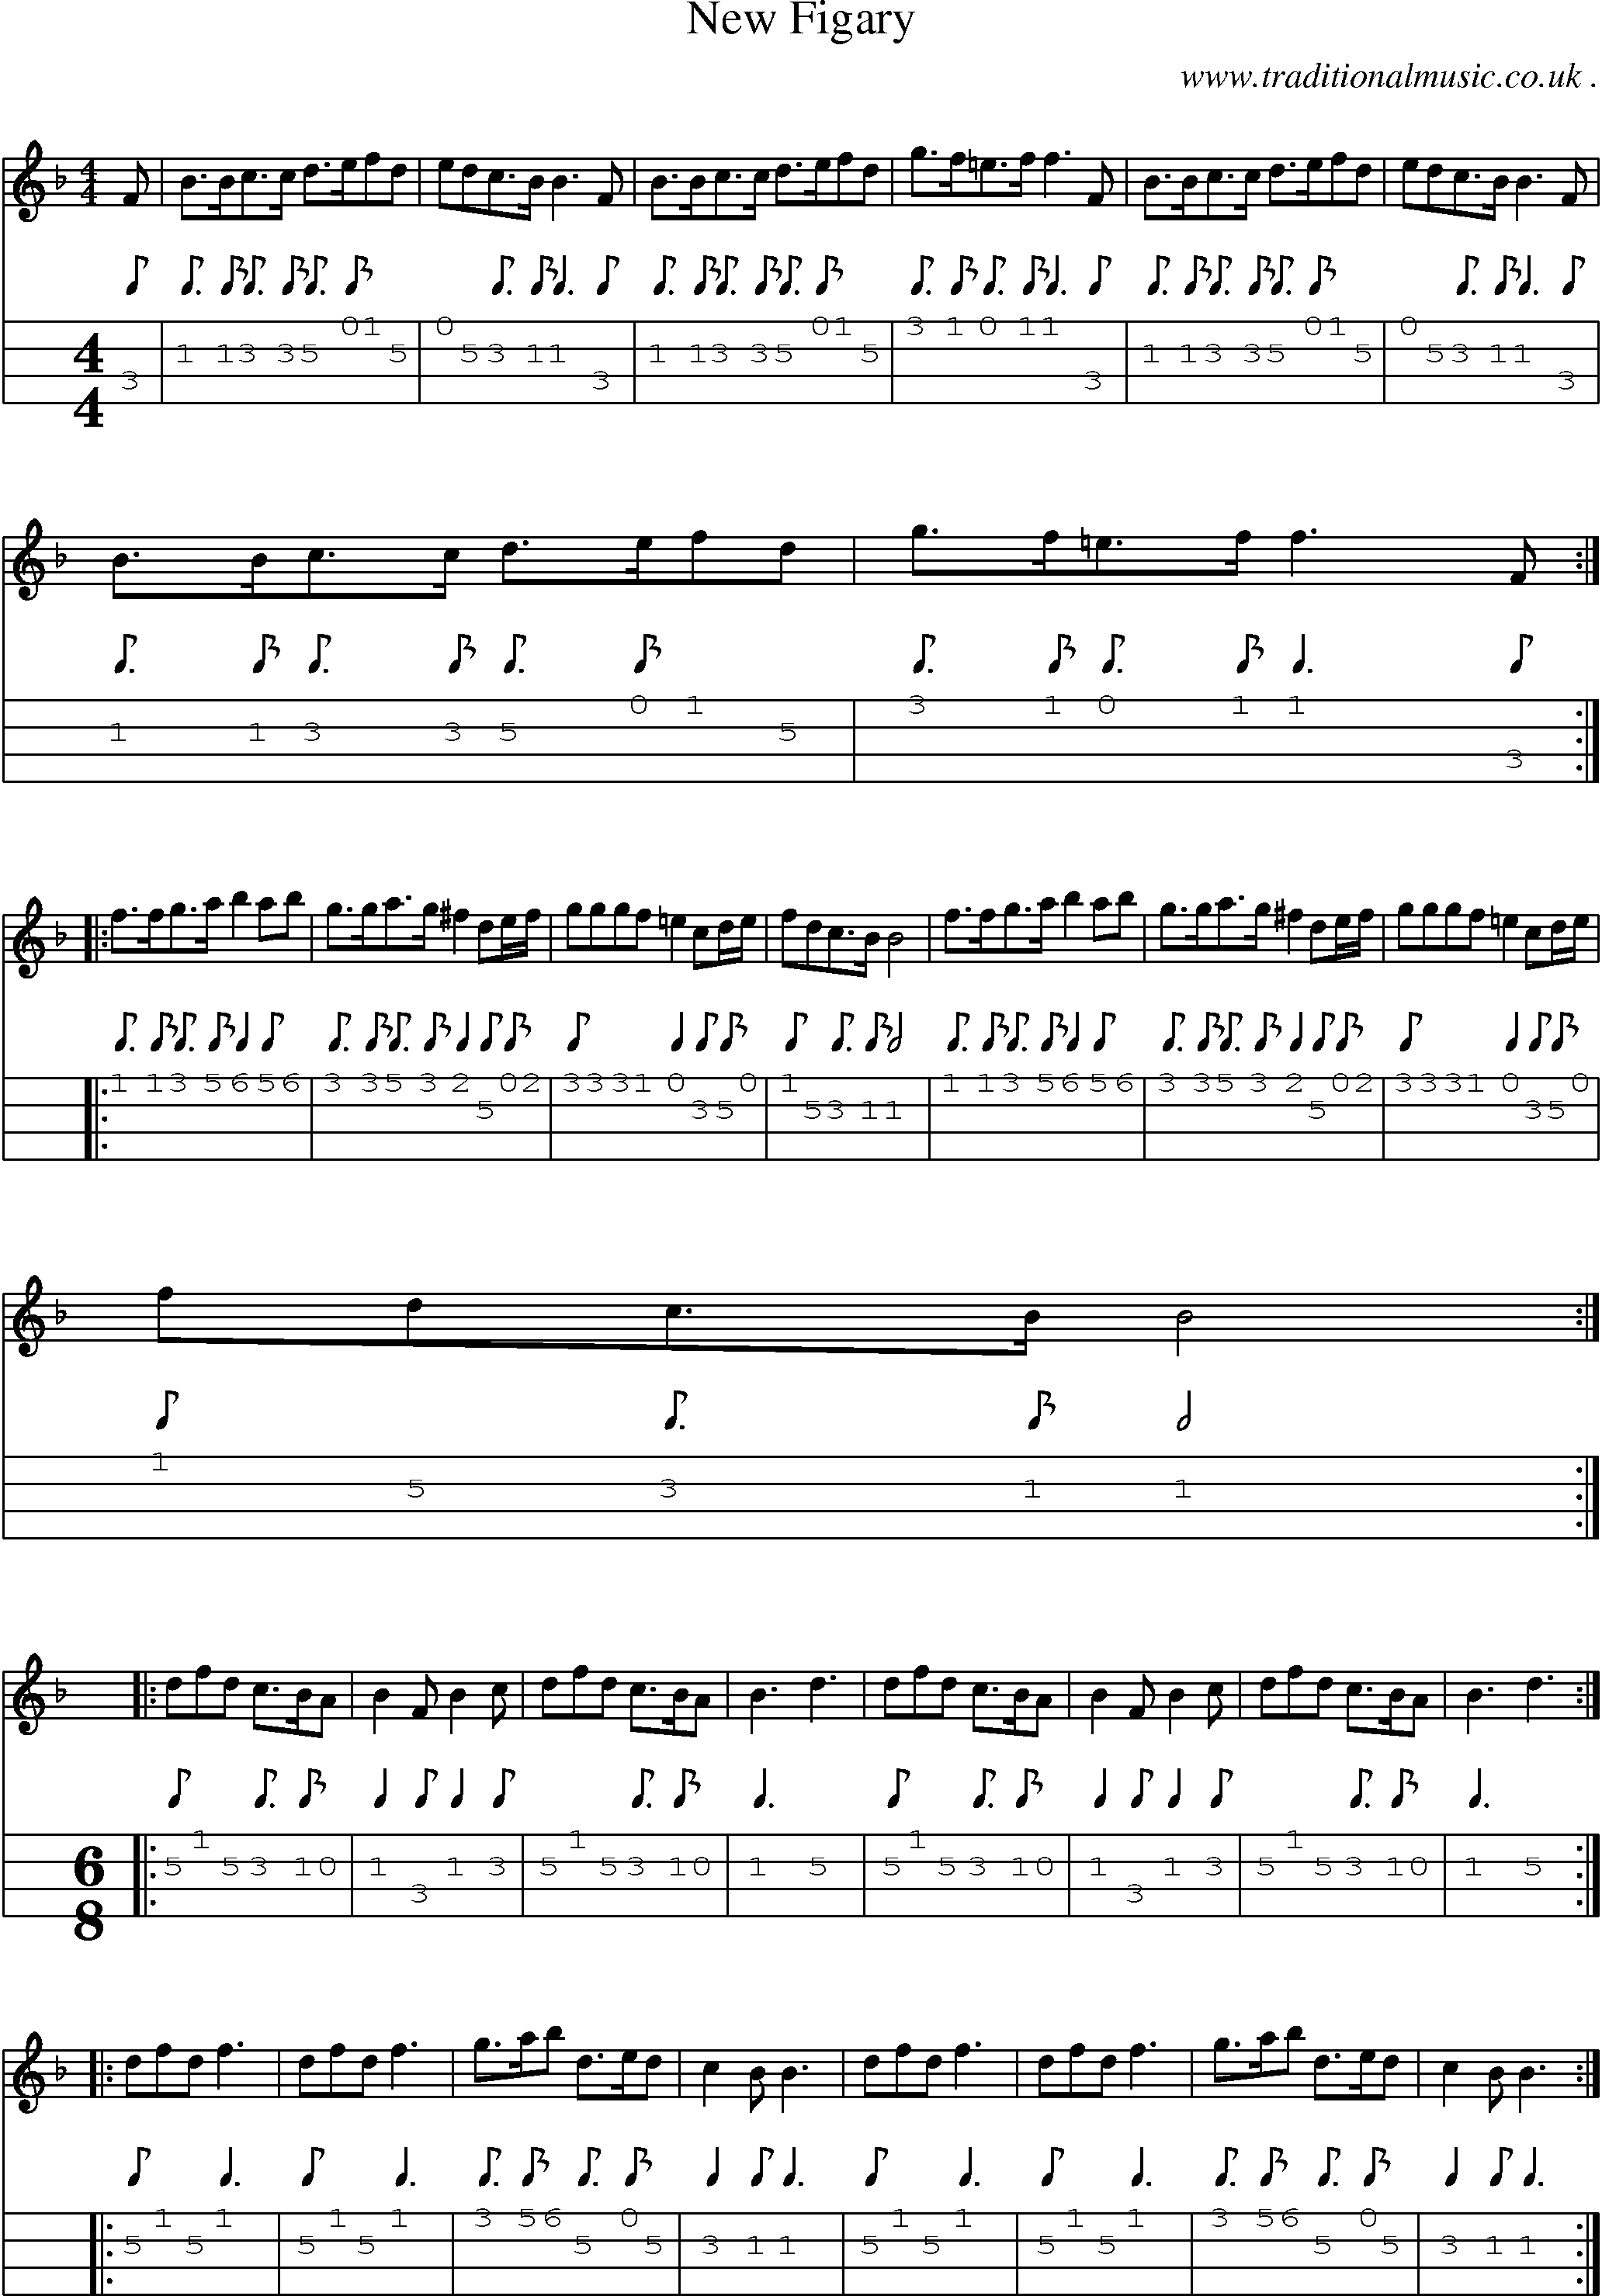 Sheet-Music and Mandolin Tabs for New Figary